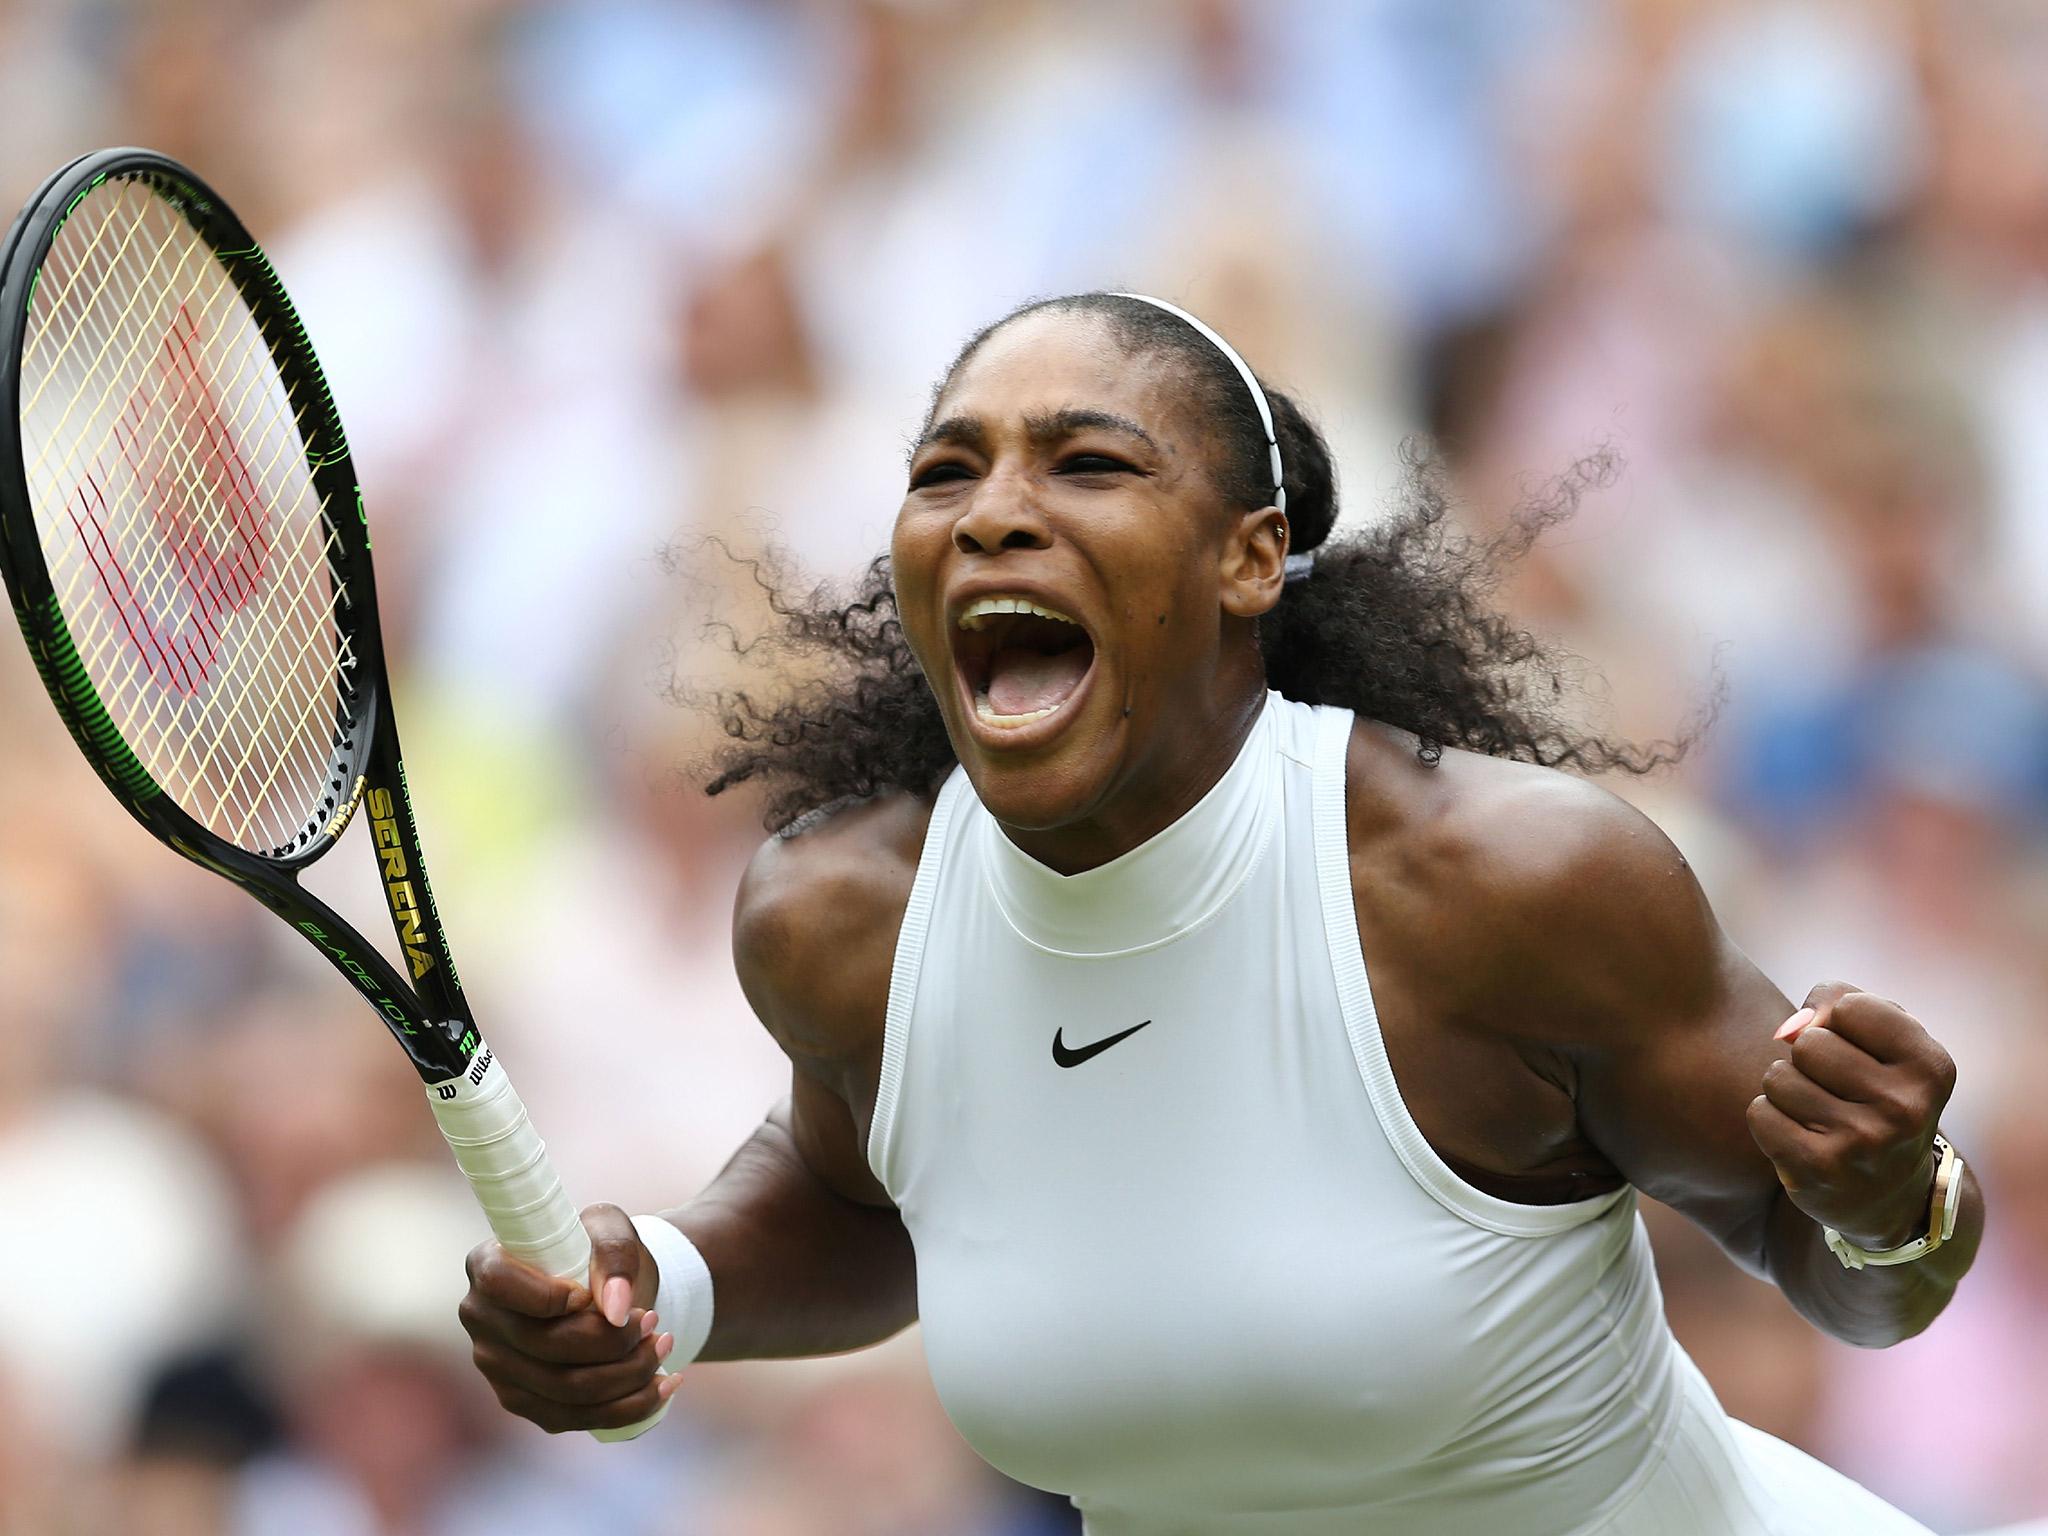 Williams gained revenge for her defeat by Kerber in Australia